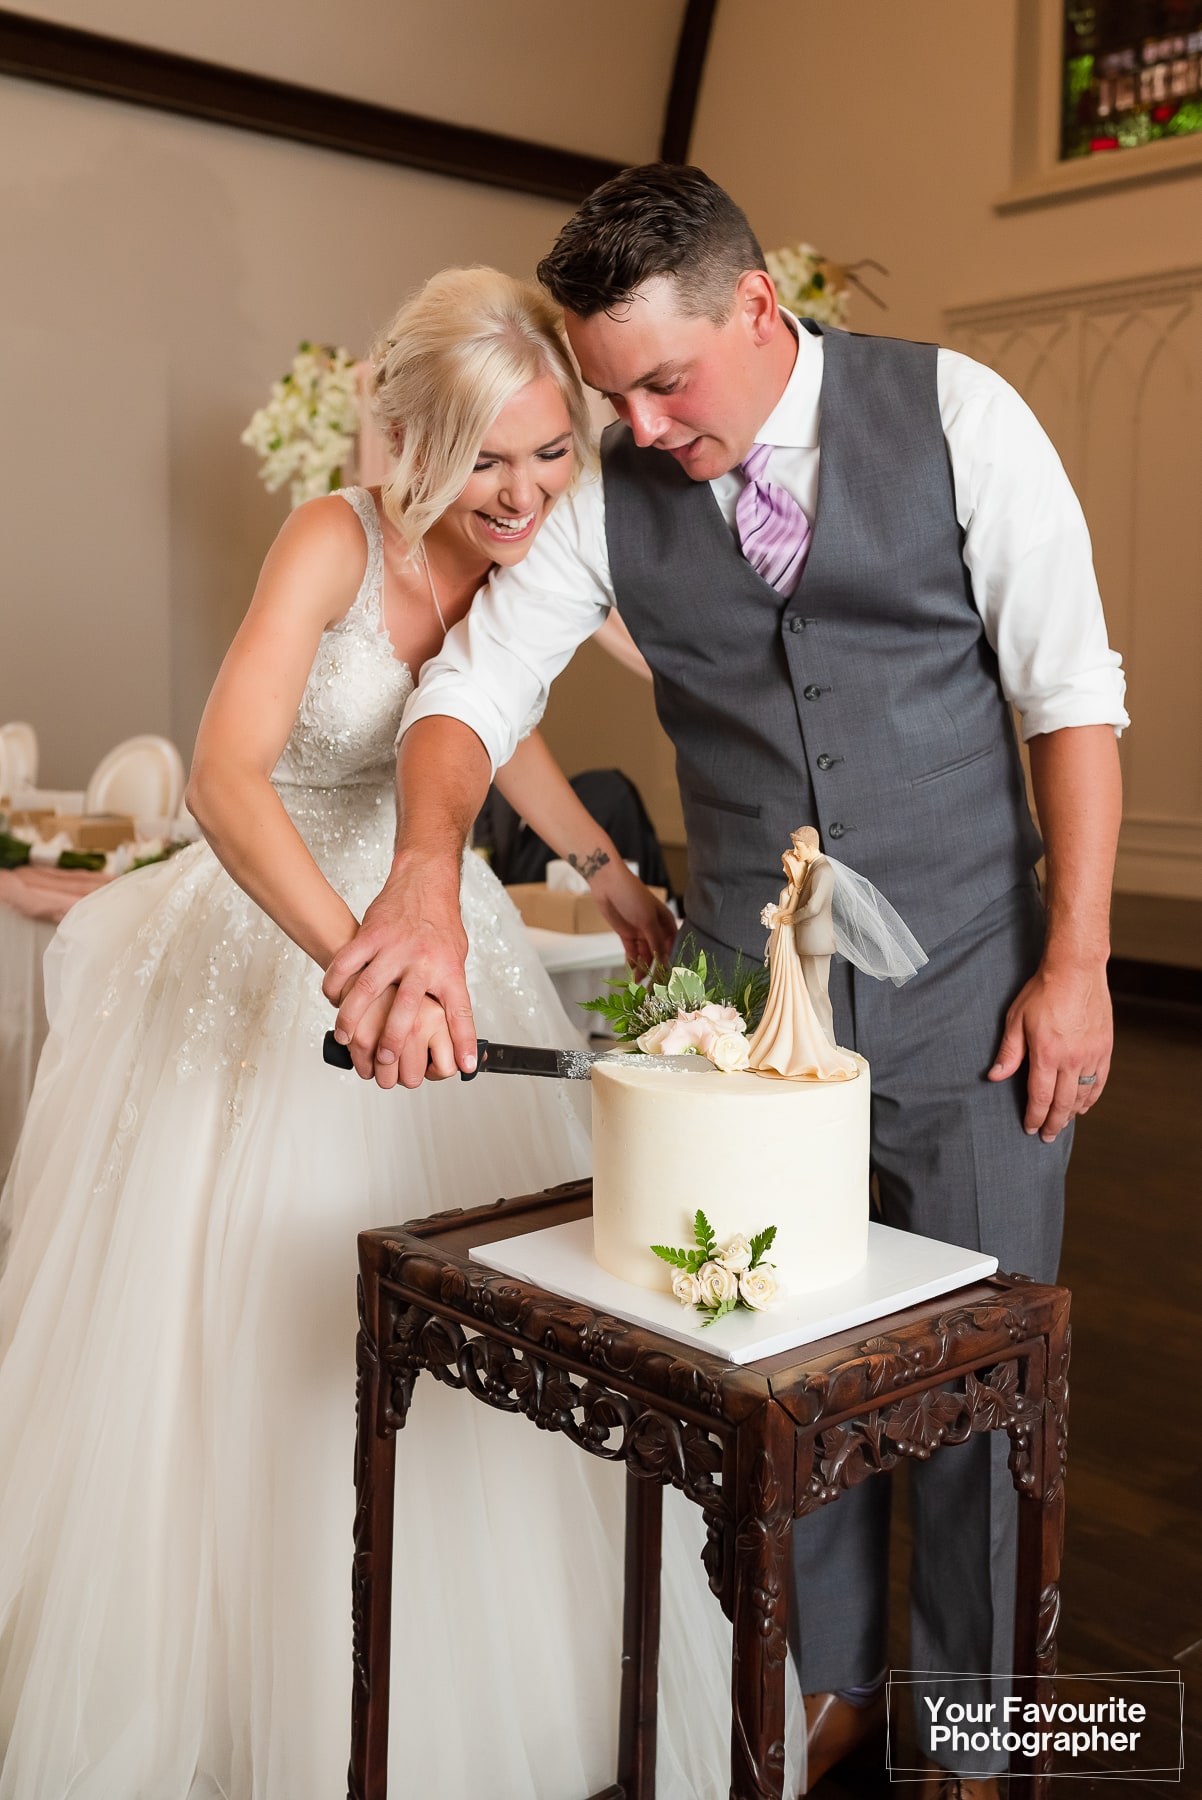 Bride and groom cake cutting